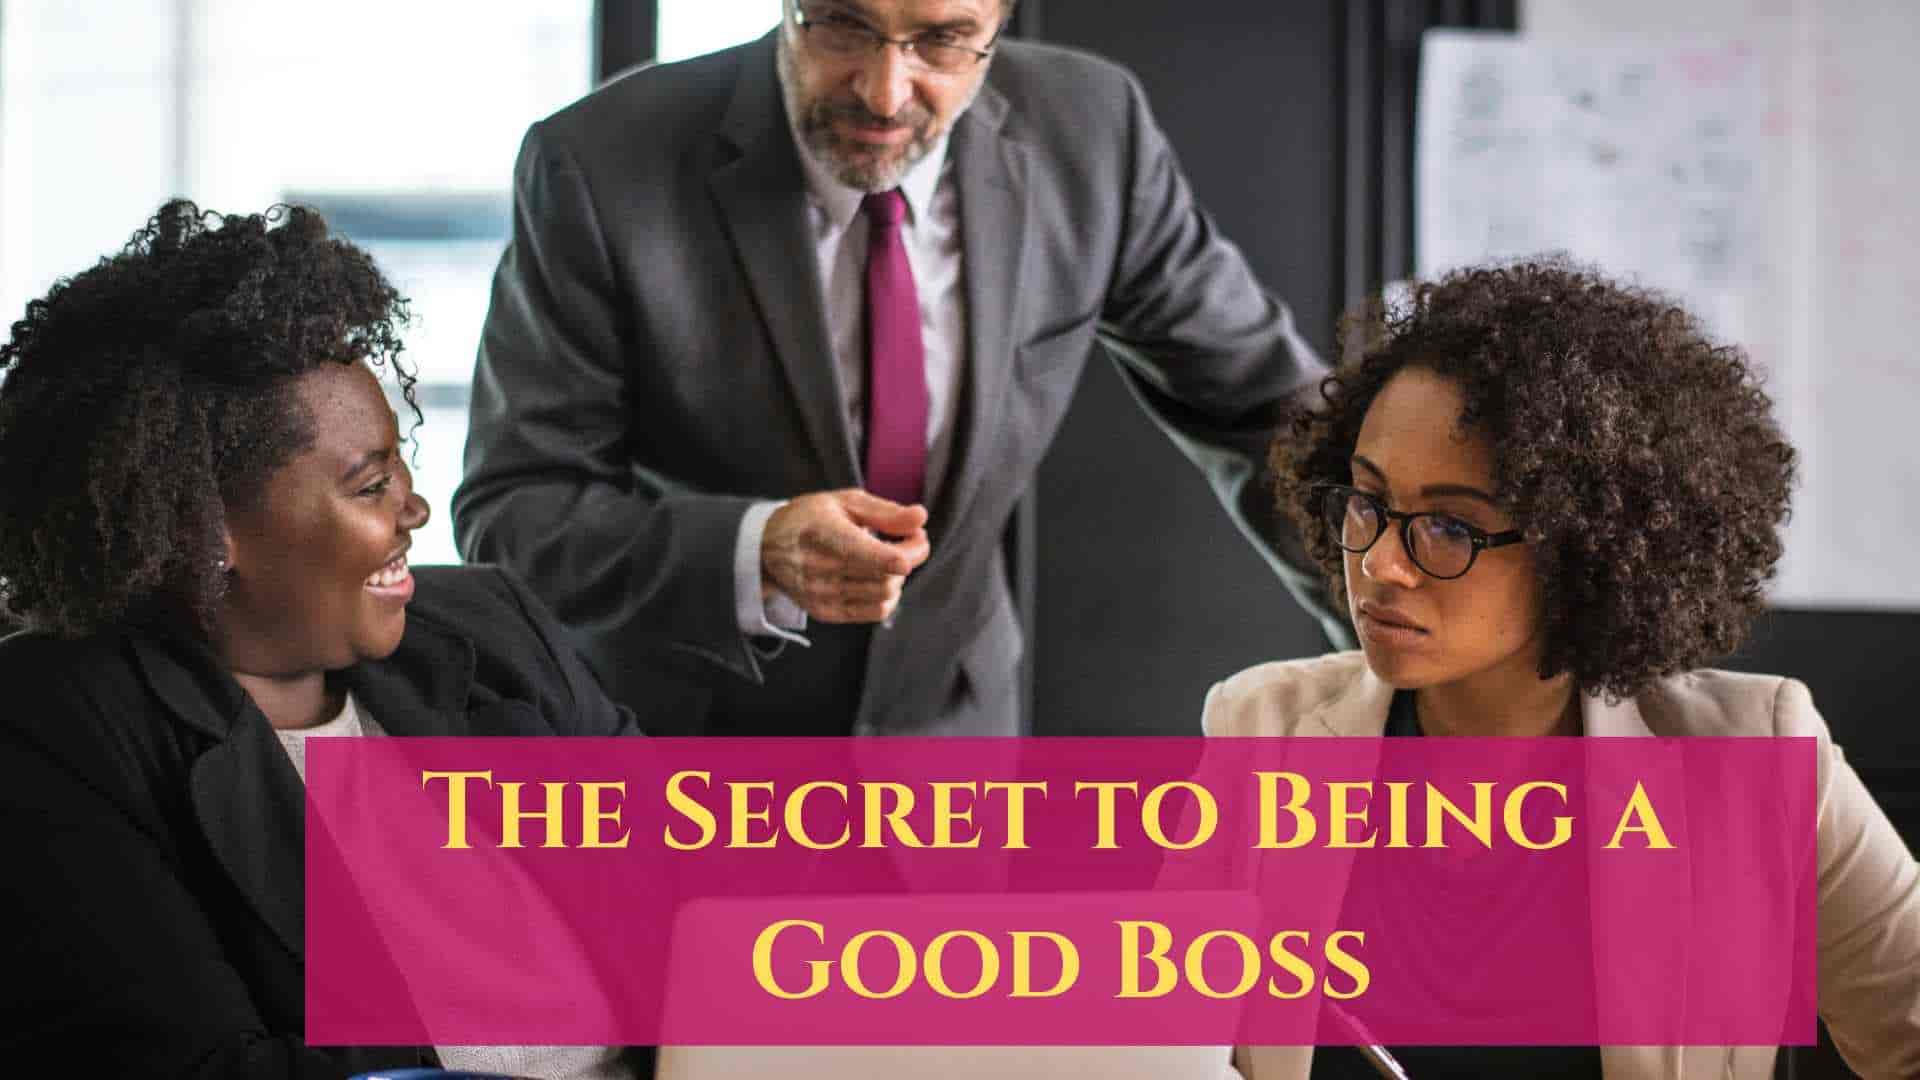 The Secret to Being a Good Boss